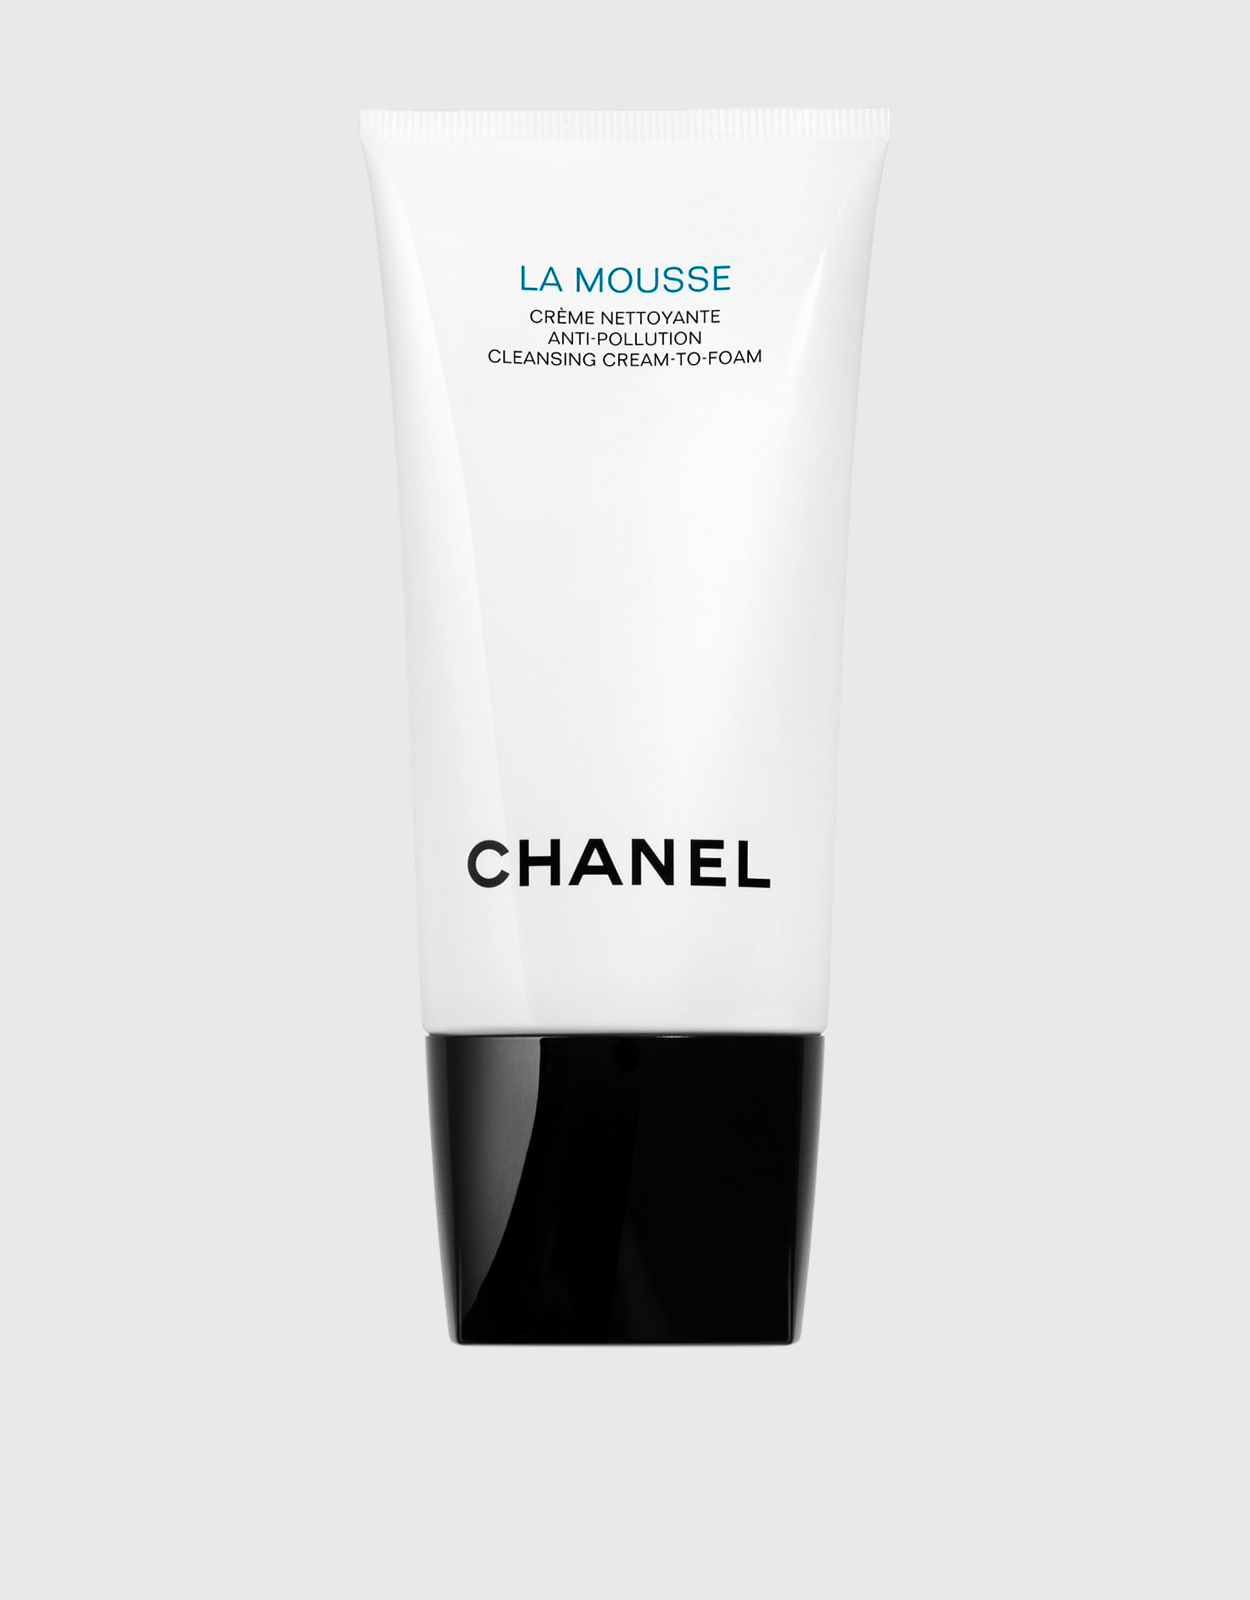 Chanel Beauty La Mousse Anti-Pollution Cleansing Cream-To-Foam